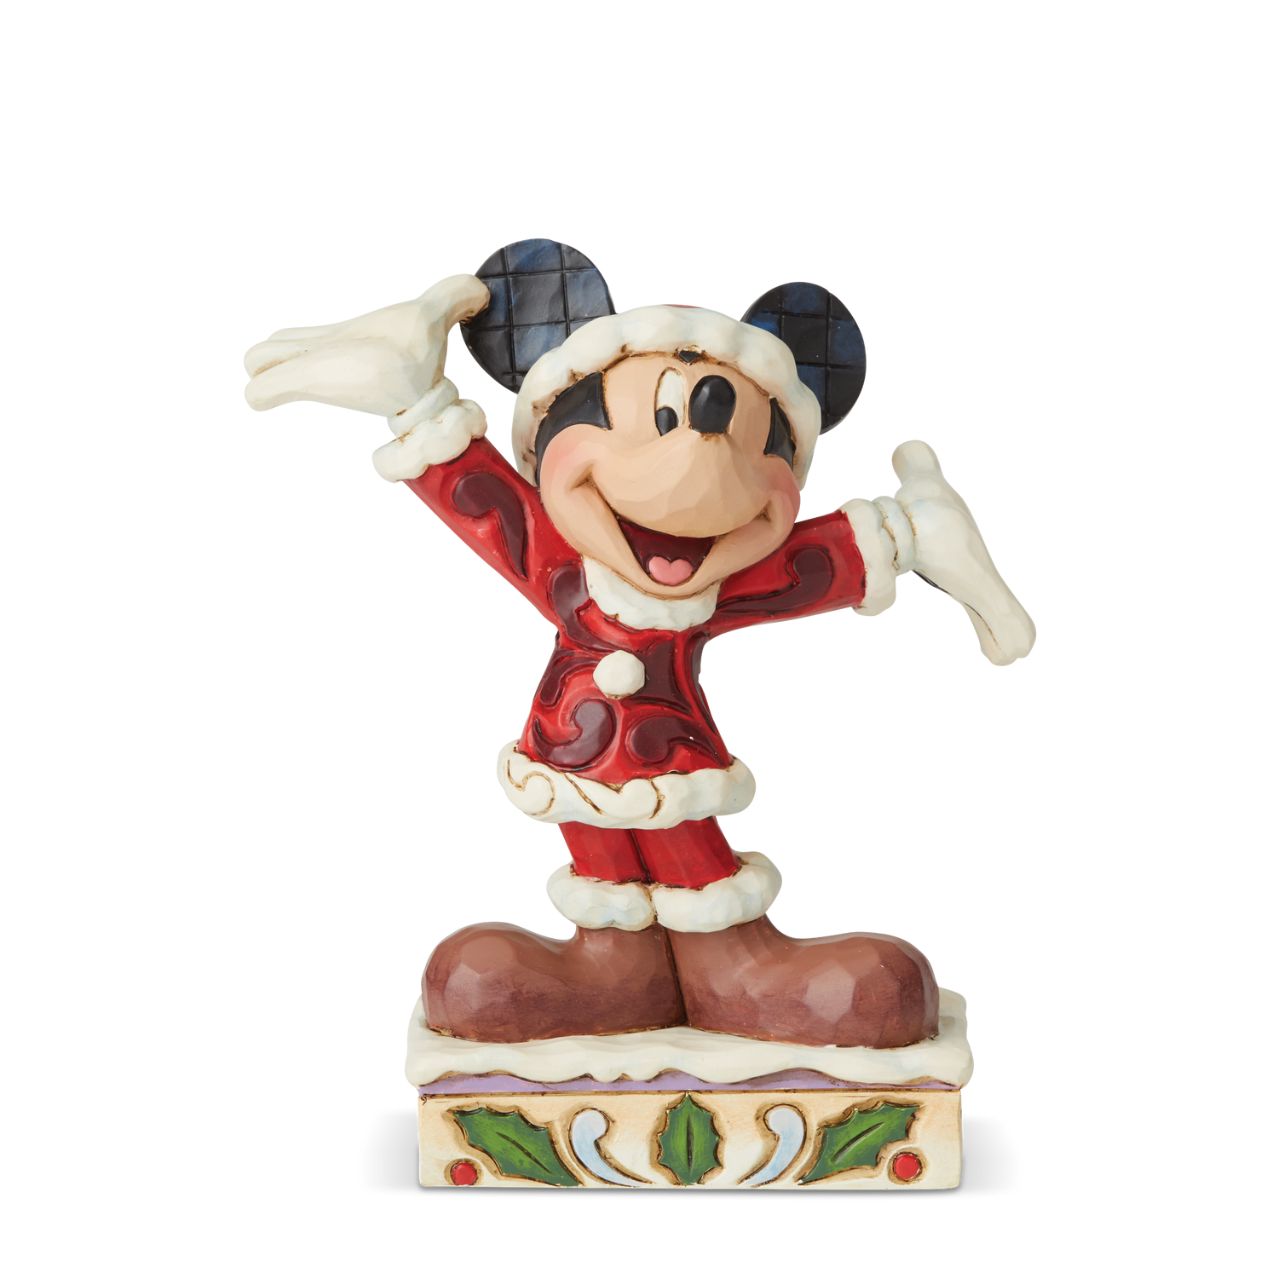 Jim Shore Tis a Splendid Season - Mickey Mouse Figurine  Dressed in his Santa suit, Mickey is excited for the arrival of the fun holiday season. This holiday Mickey is hand-crafted in cast stone and hand painted with Jim Shore's signature rosemaling design.